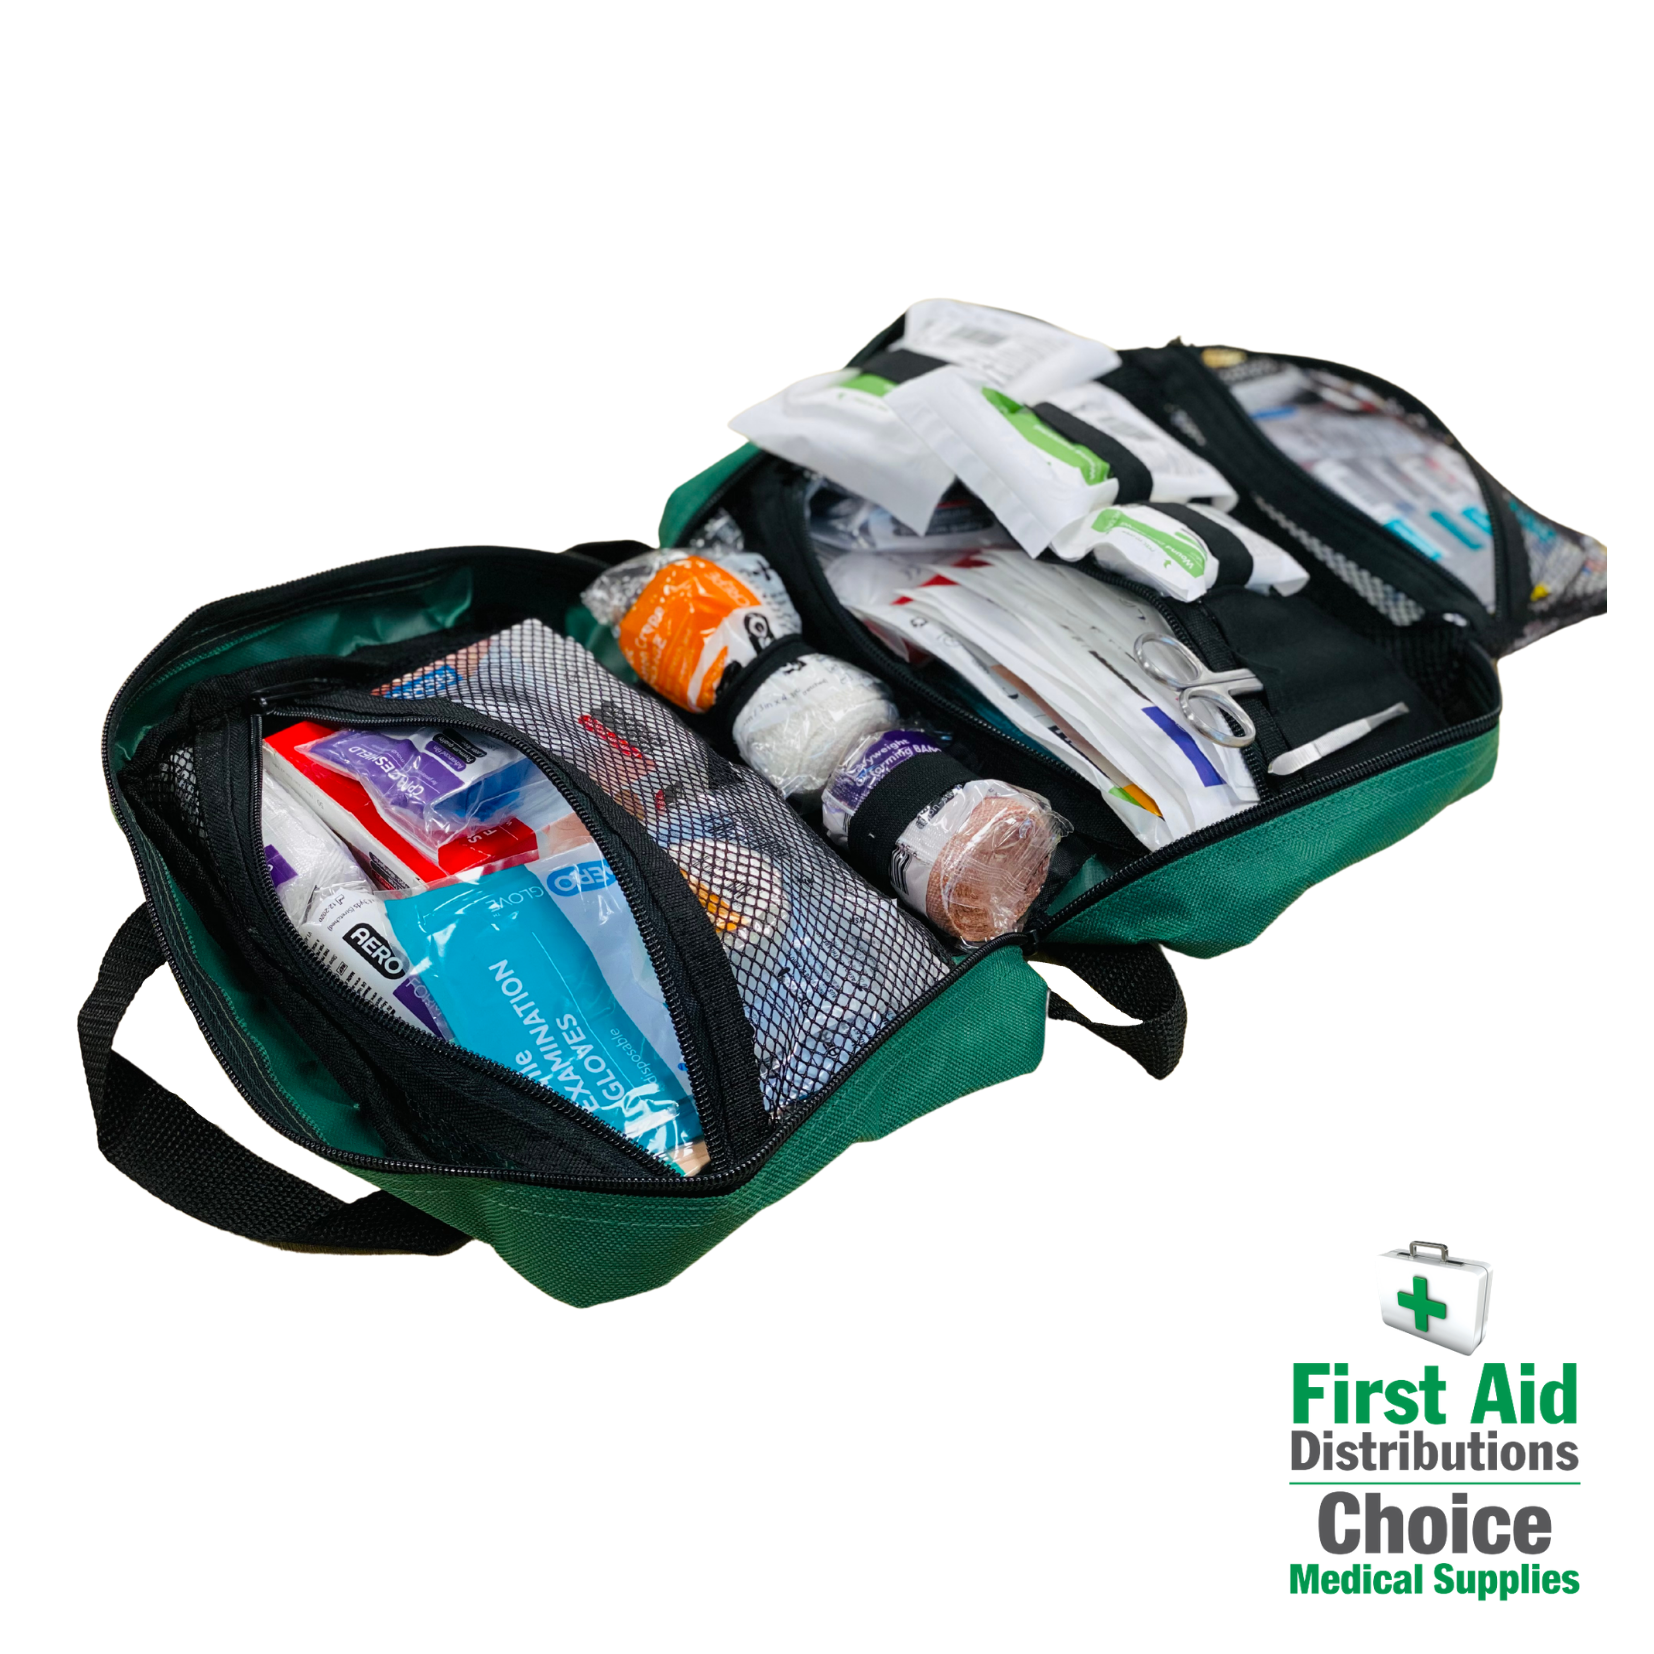 collections/Model_15_Kit_Inside_First_Aid_Distributions.png